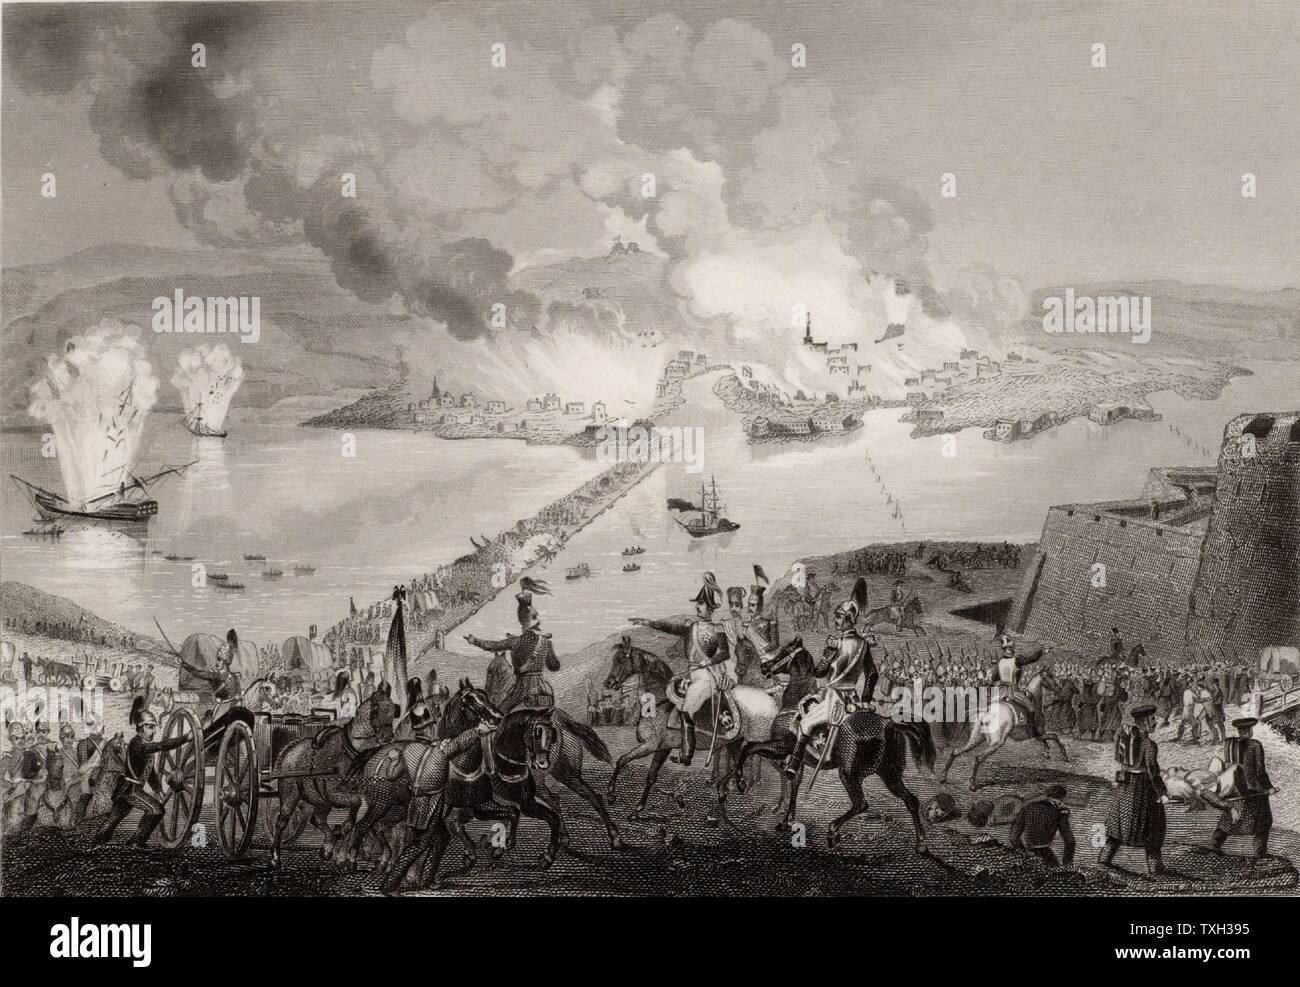 Crimean (Russo-Turkish) War 1853-1856. Siege of Sebastopol (Sevastopol) October 1854 to September 1855. View from the south showing the Russian retreat on 8 September 1855.  Steel engraving c1860 Stock Photo